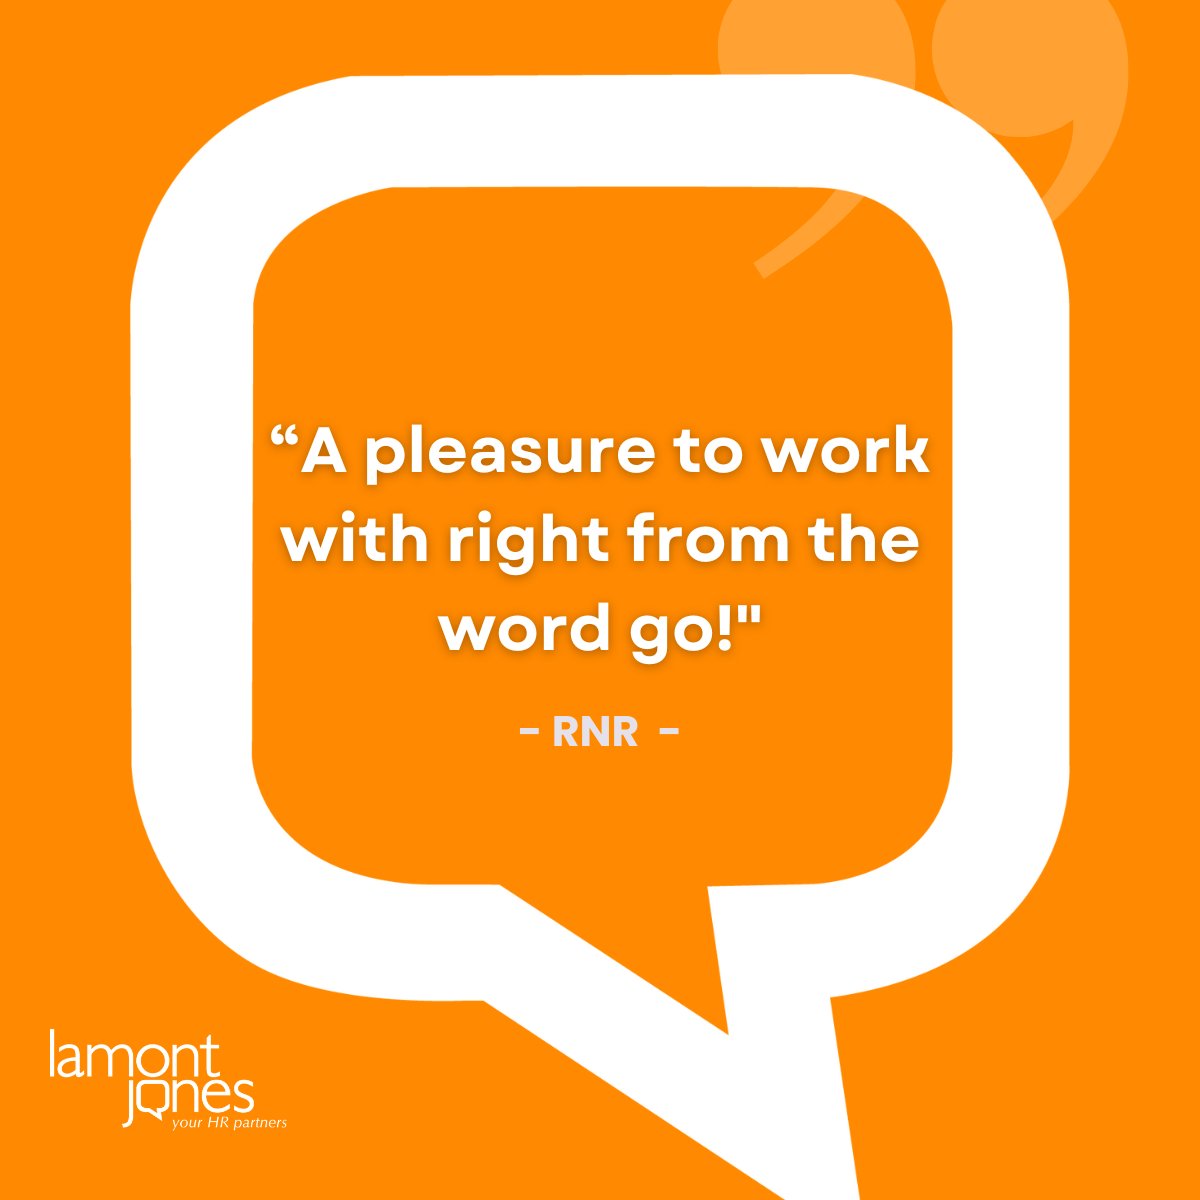 Client Testimonial: Lamont Jones - Providing Exceptional Support from Day One
Learn how we can provide tailored HR solutions for your business needs
Read the Full Review Here: lamontjones.co.uk
#ClientTestimonial #HappyClients #ExceptionalSupport #HRServices